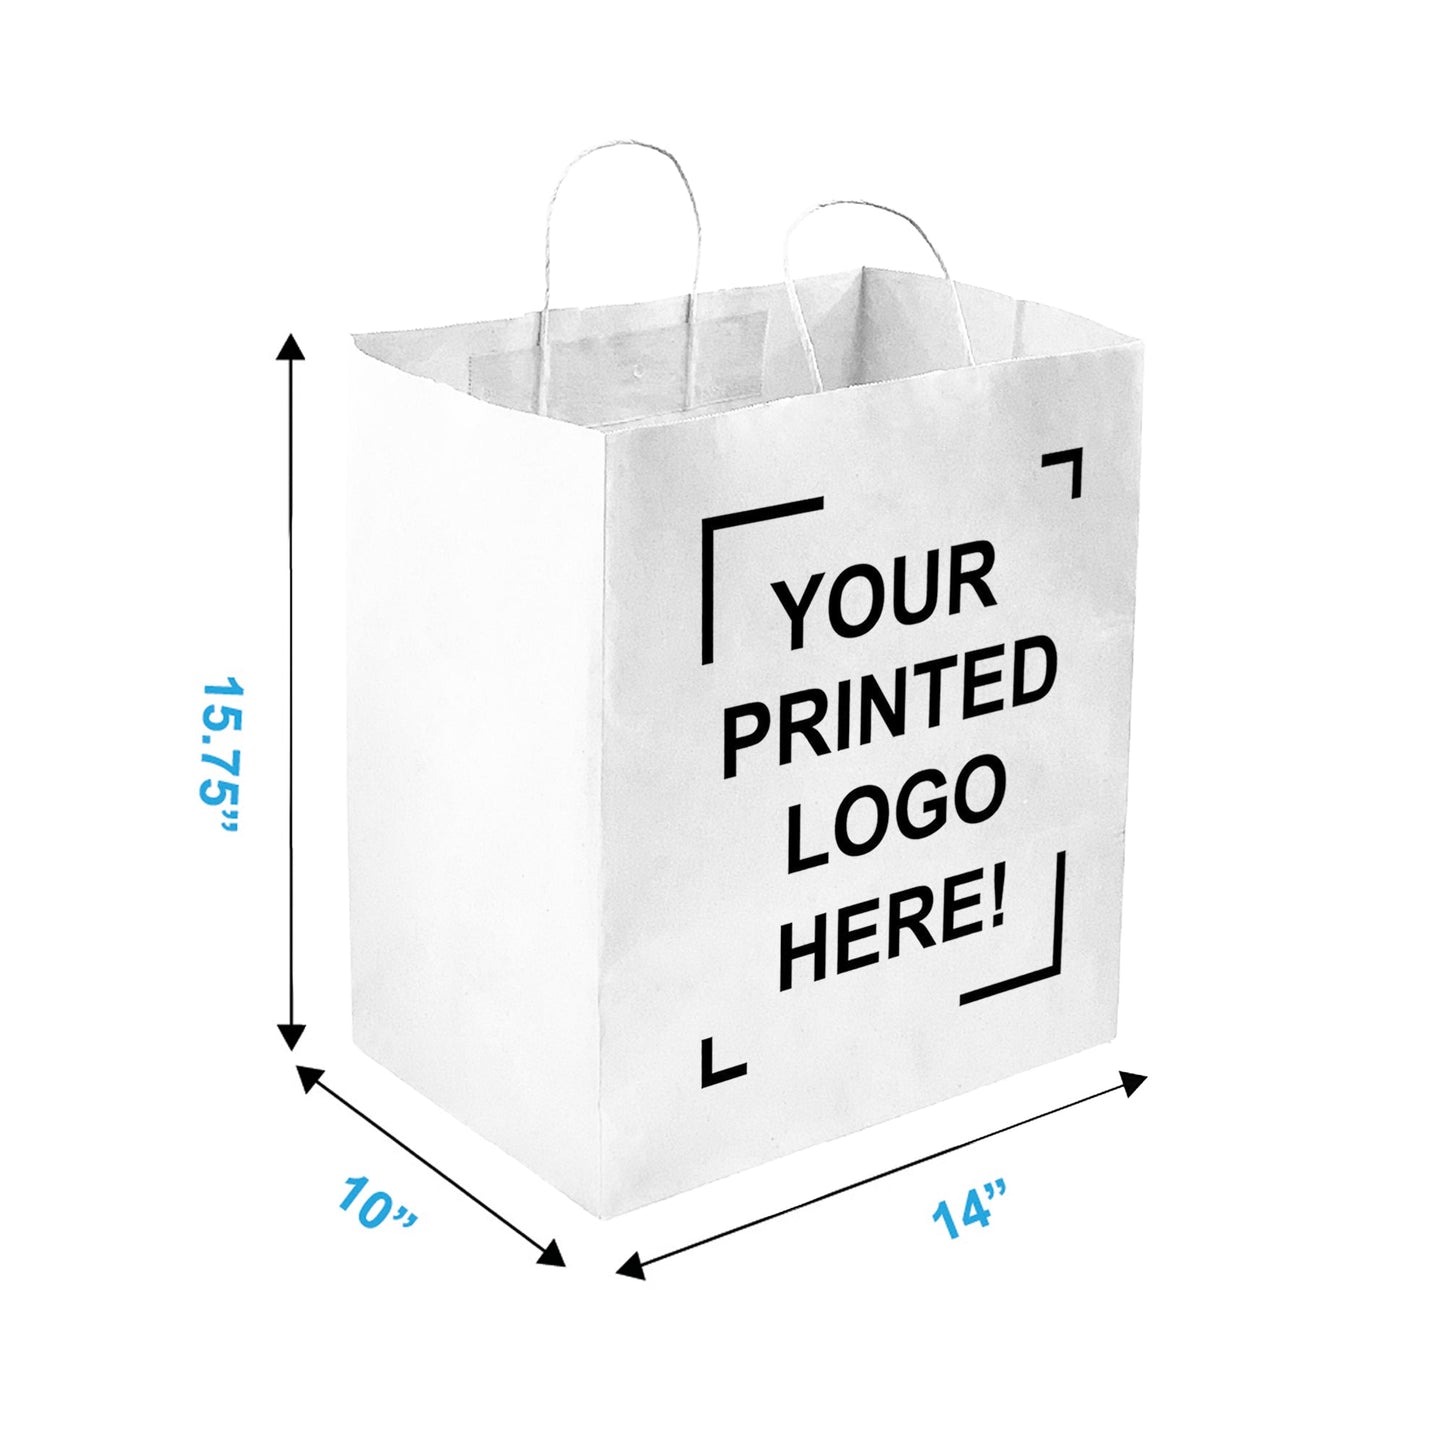 200 Pcs, Super Royal, 14x10x15.75 inches, White Paper Bags, with Twisted Handle, Full Color Custom Print